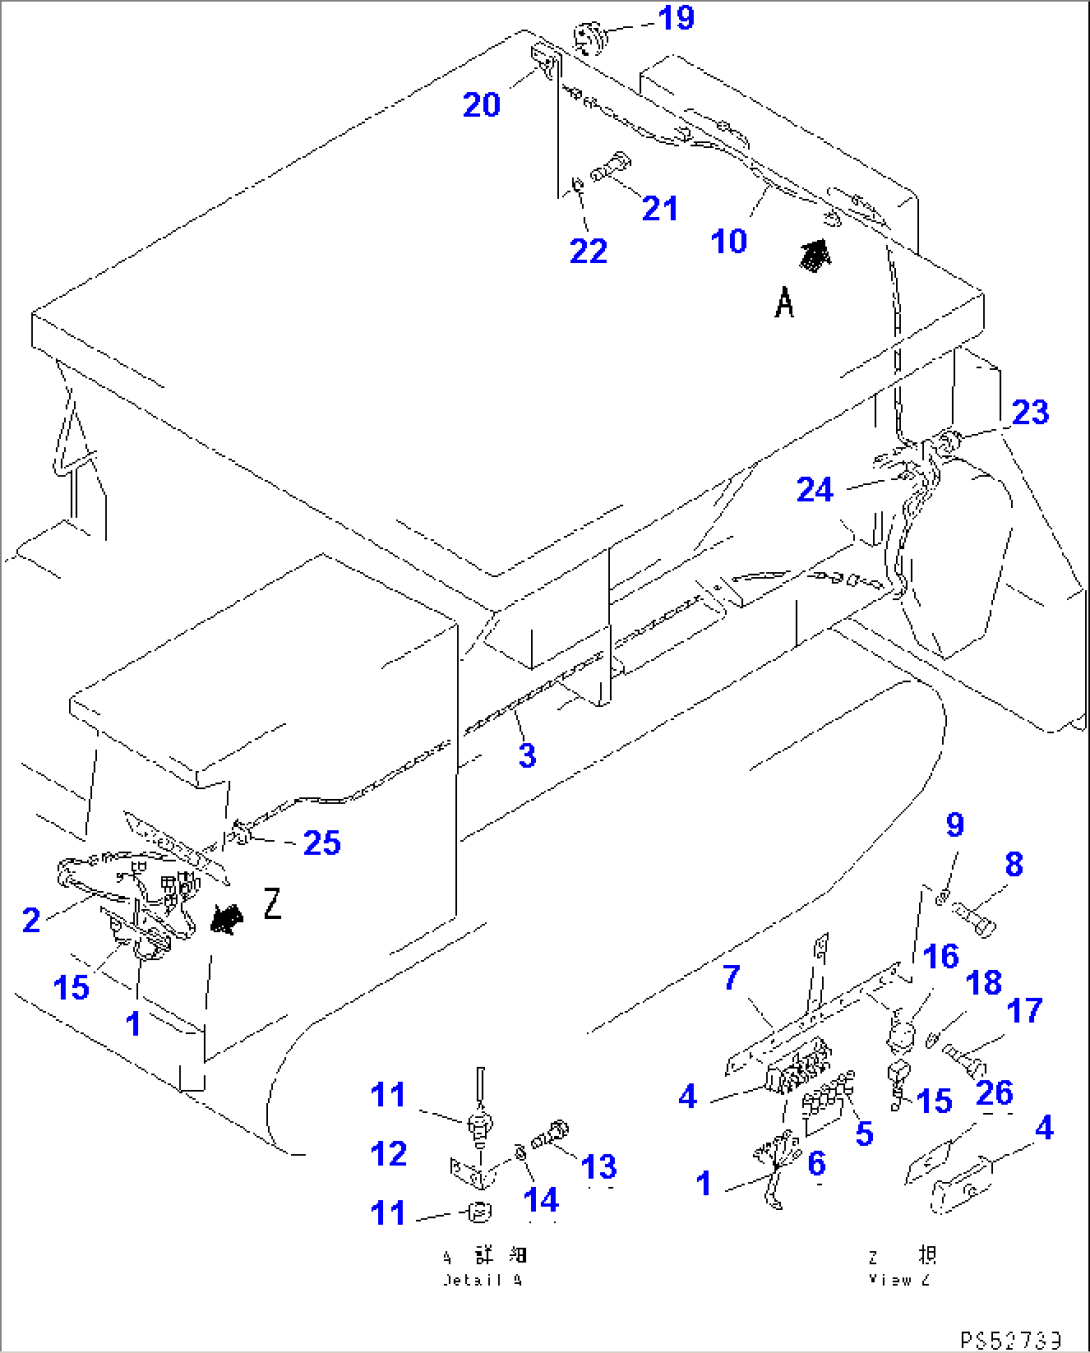 ELECTRICAL SYSTEM (GATE SENSOR) (WITH AUTOMATIC SPLINKLING SYSTEM)(#1011-1024)